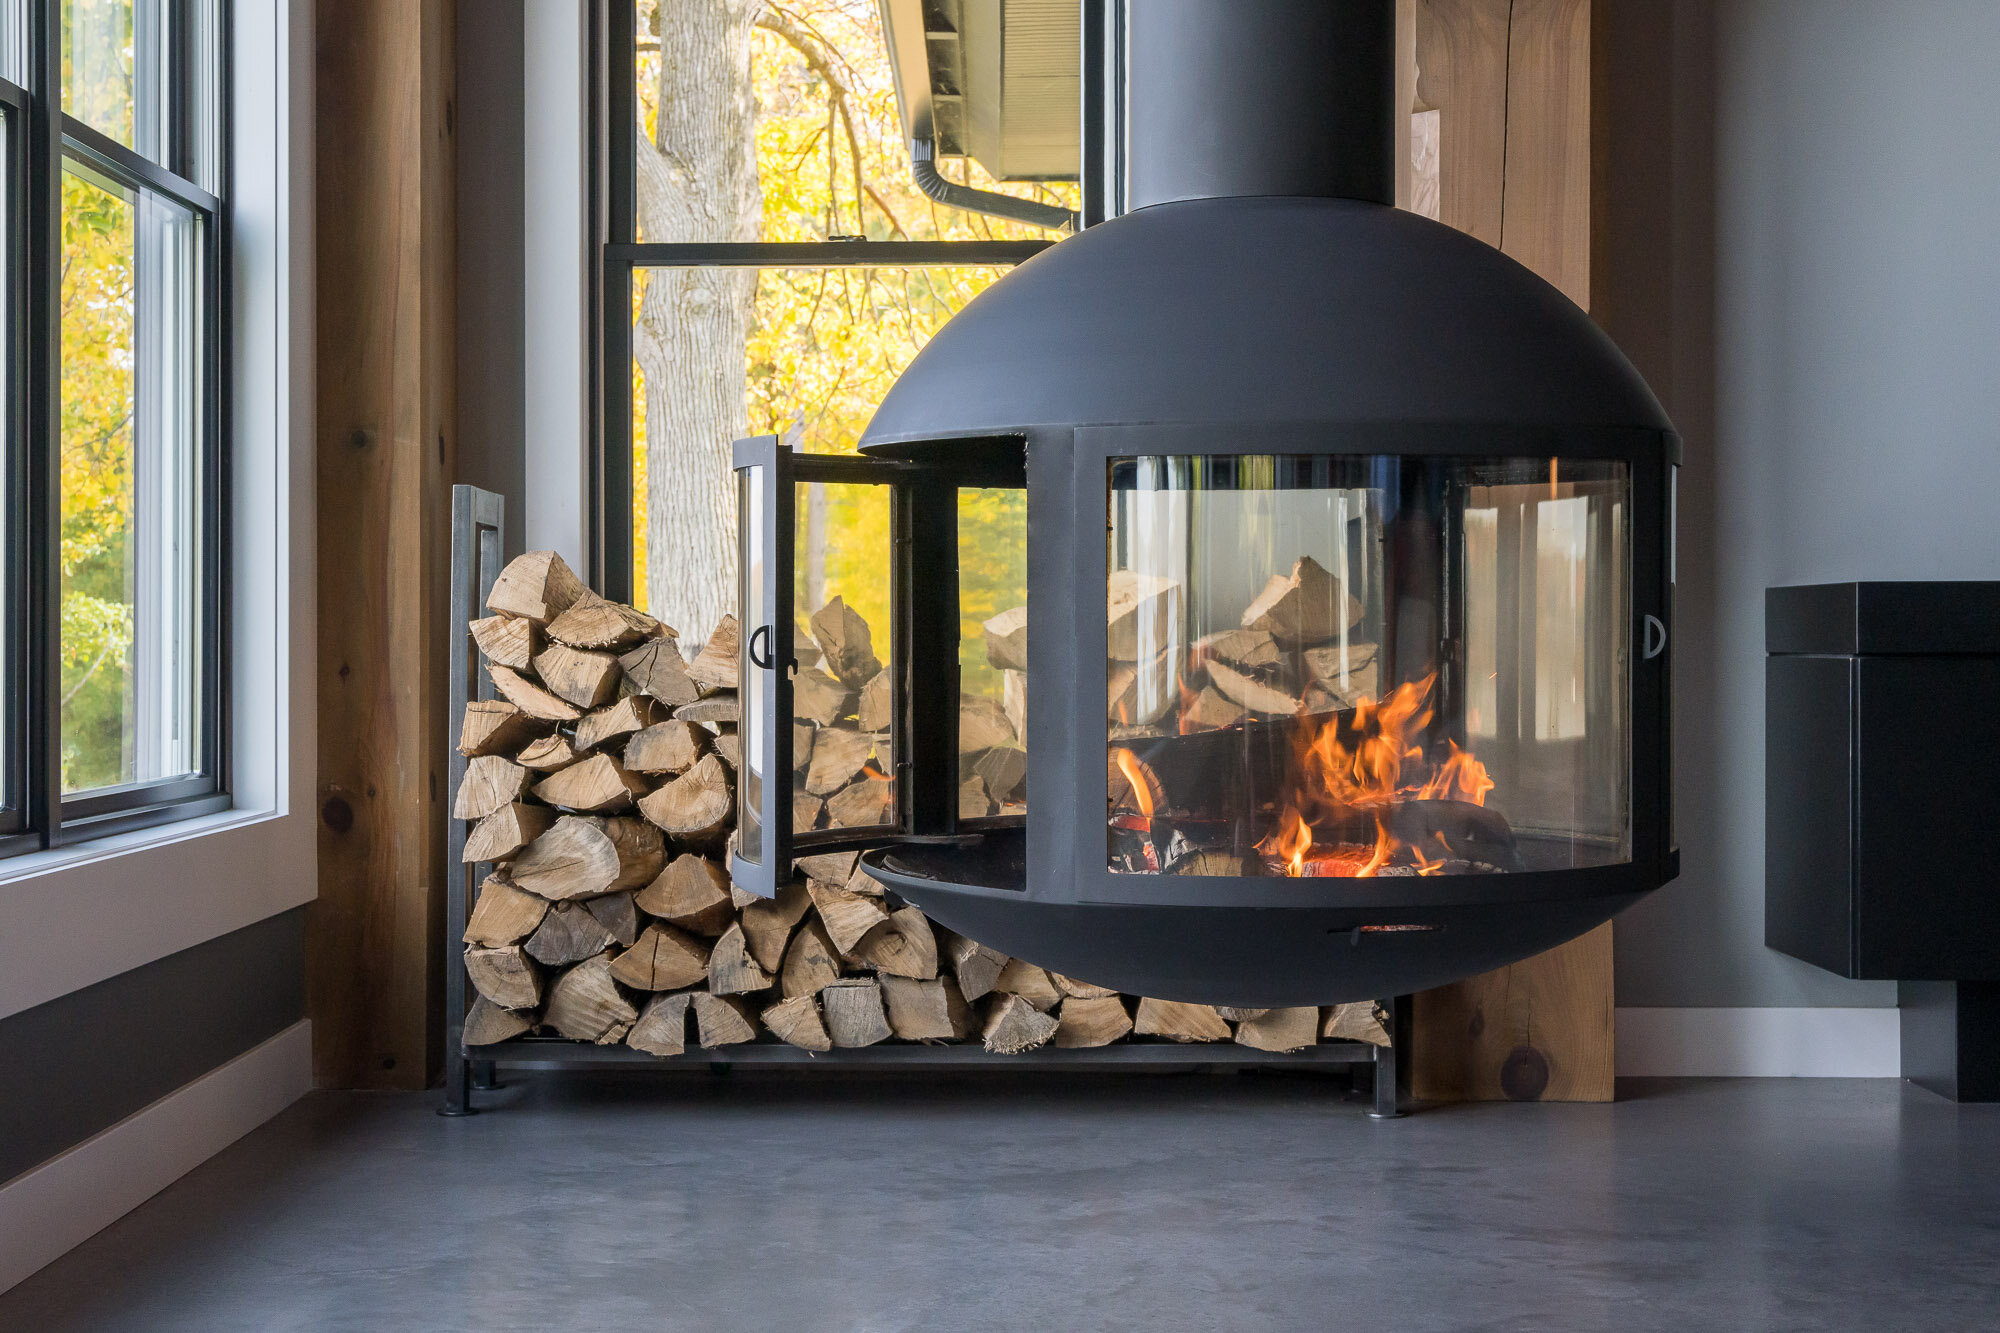 Fire burns in this European fireplace from focus.